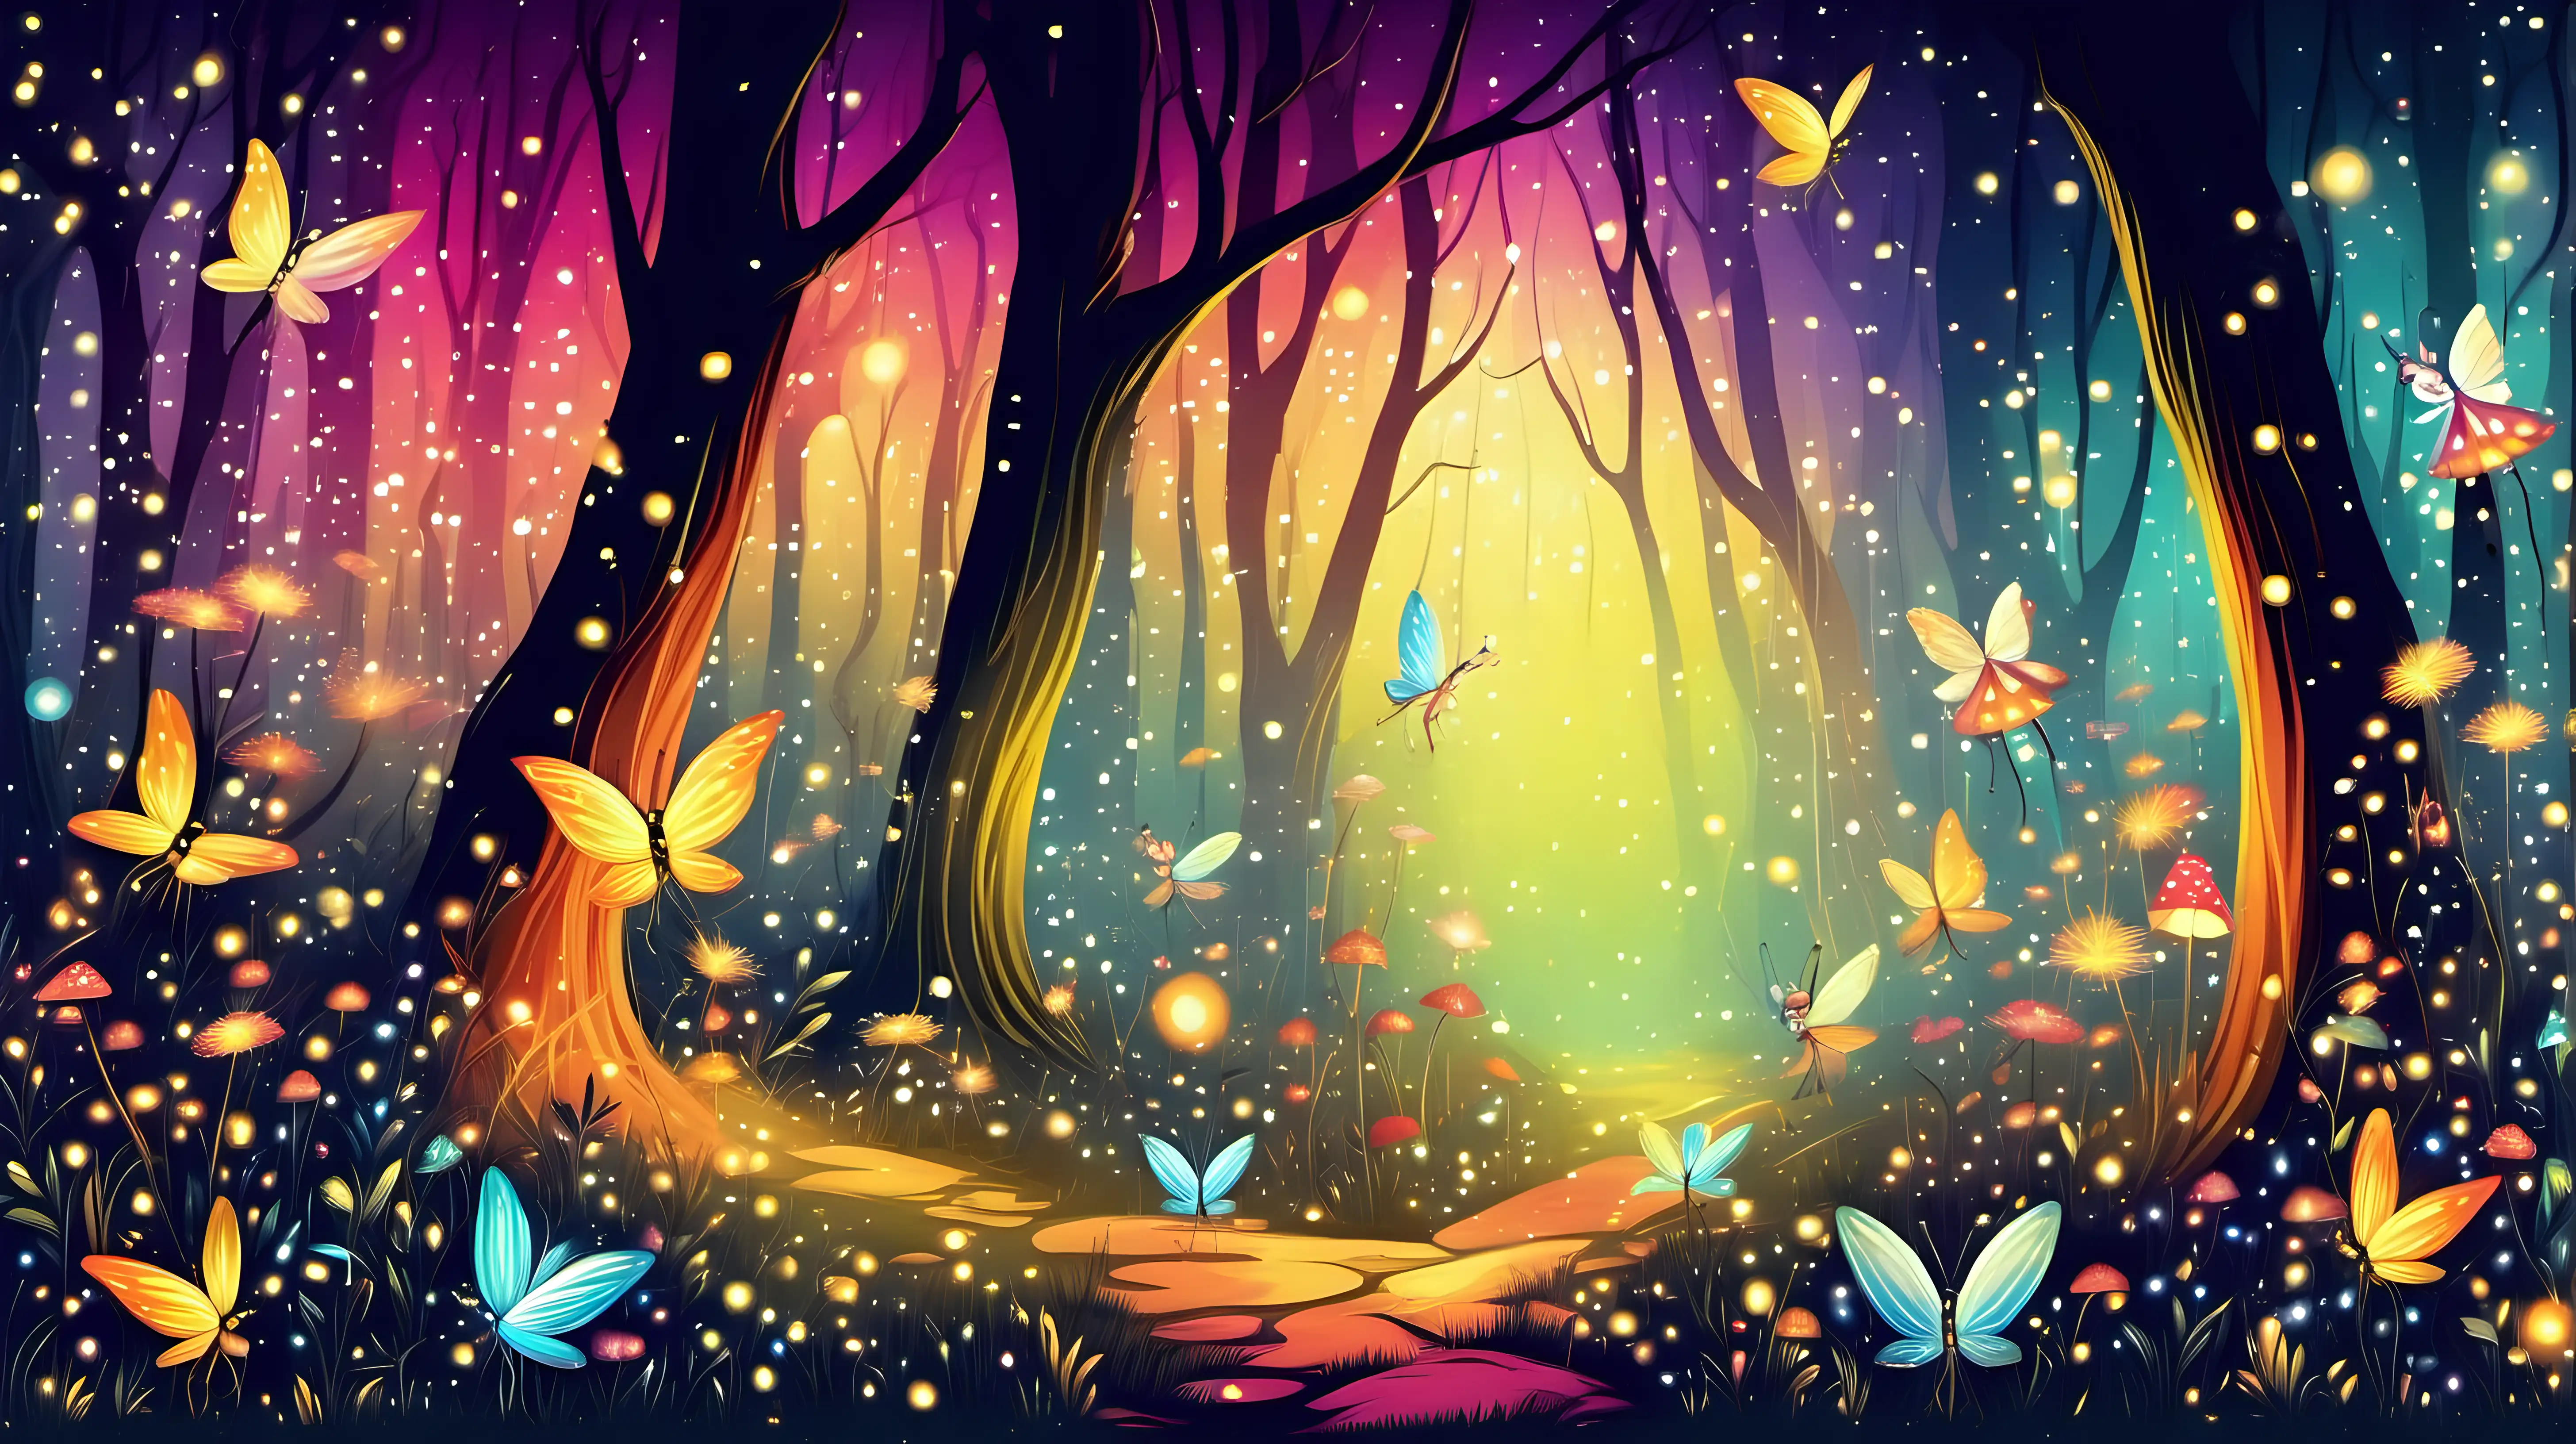 Enchanting Forest Scene with Colorful Fairies and Fireflies